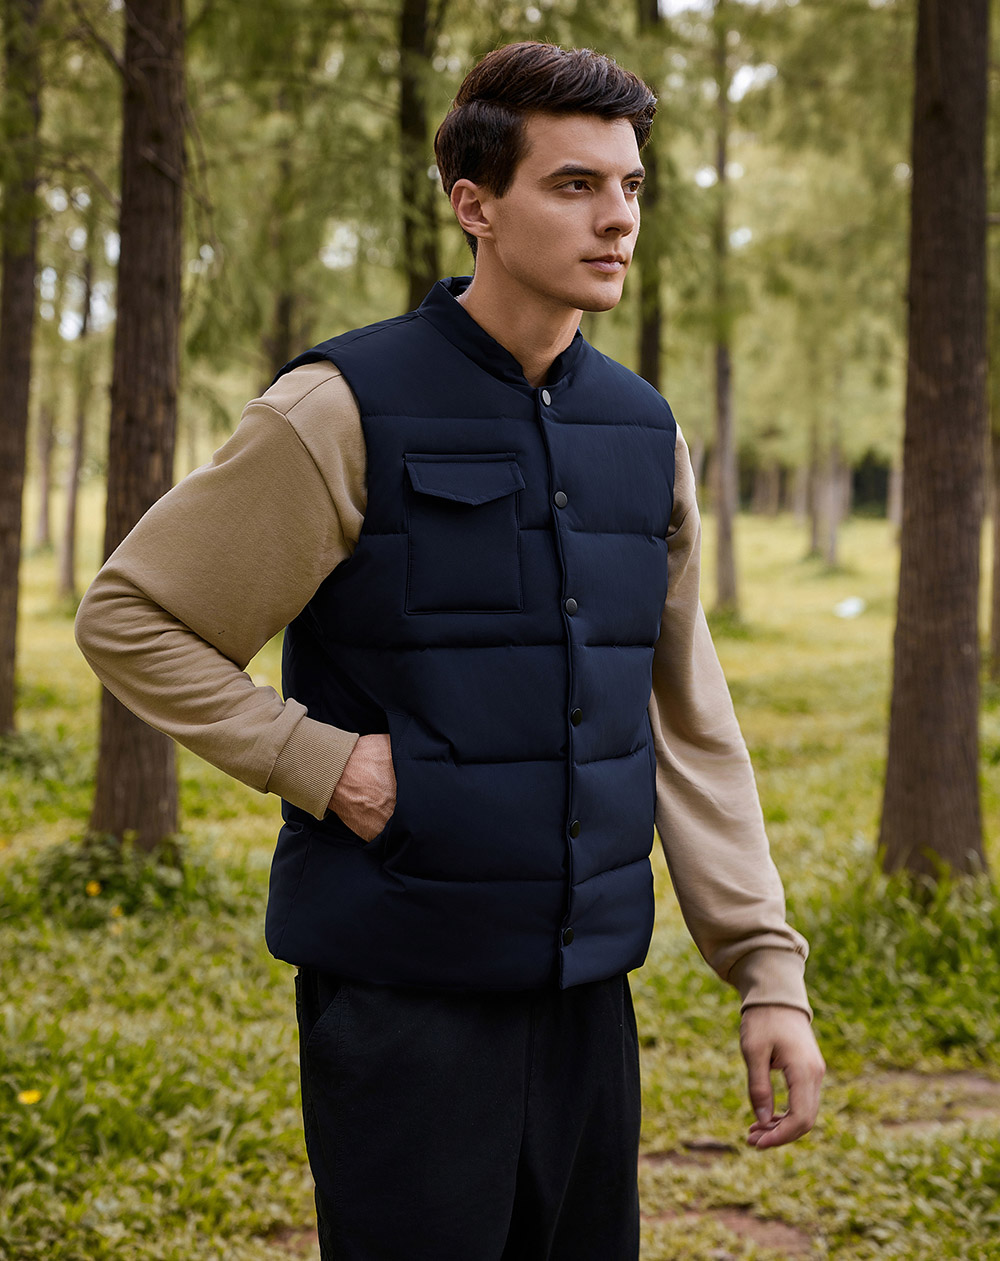 Puffer Vest Water-Resistant Upper T400 Oxford Lining 300g Button Down